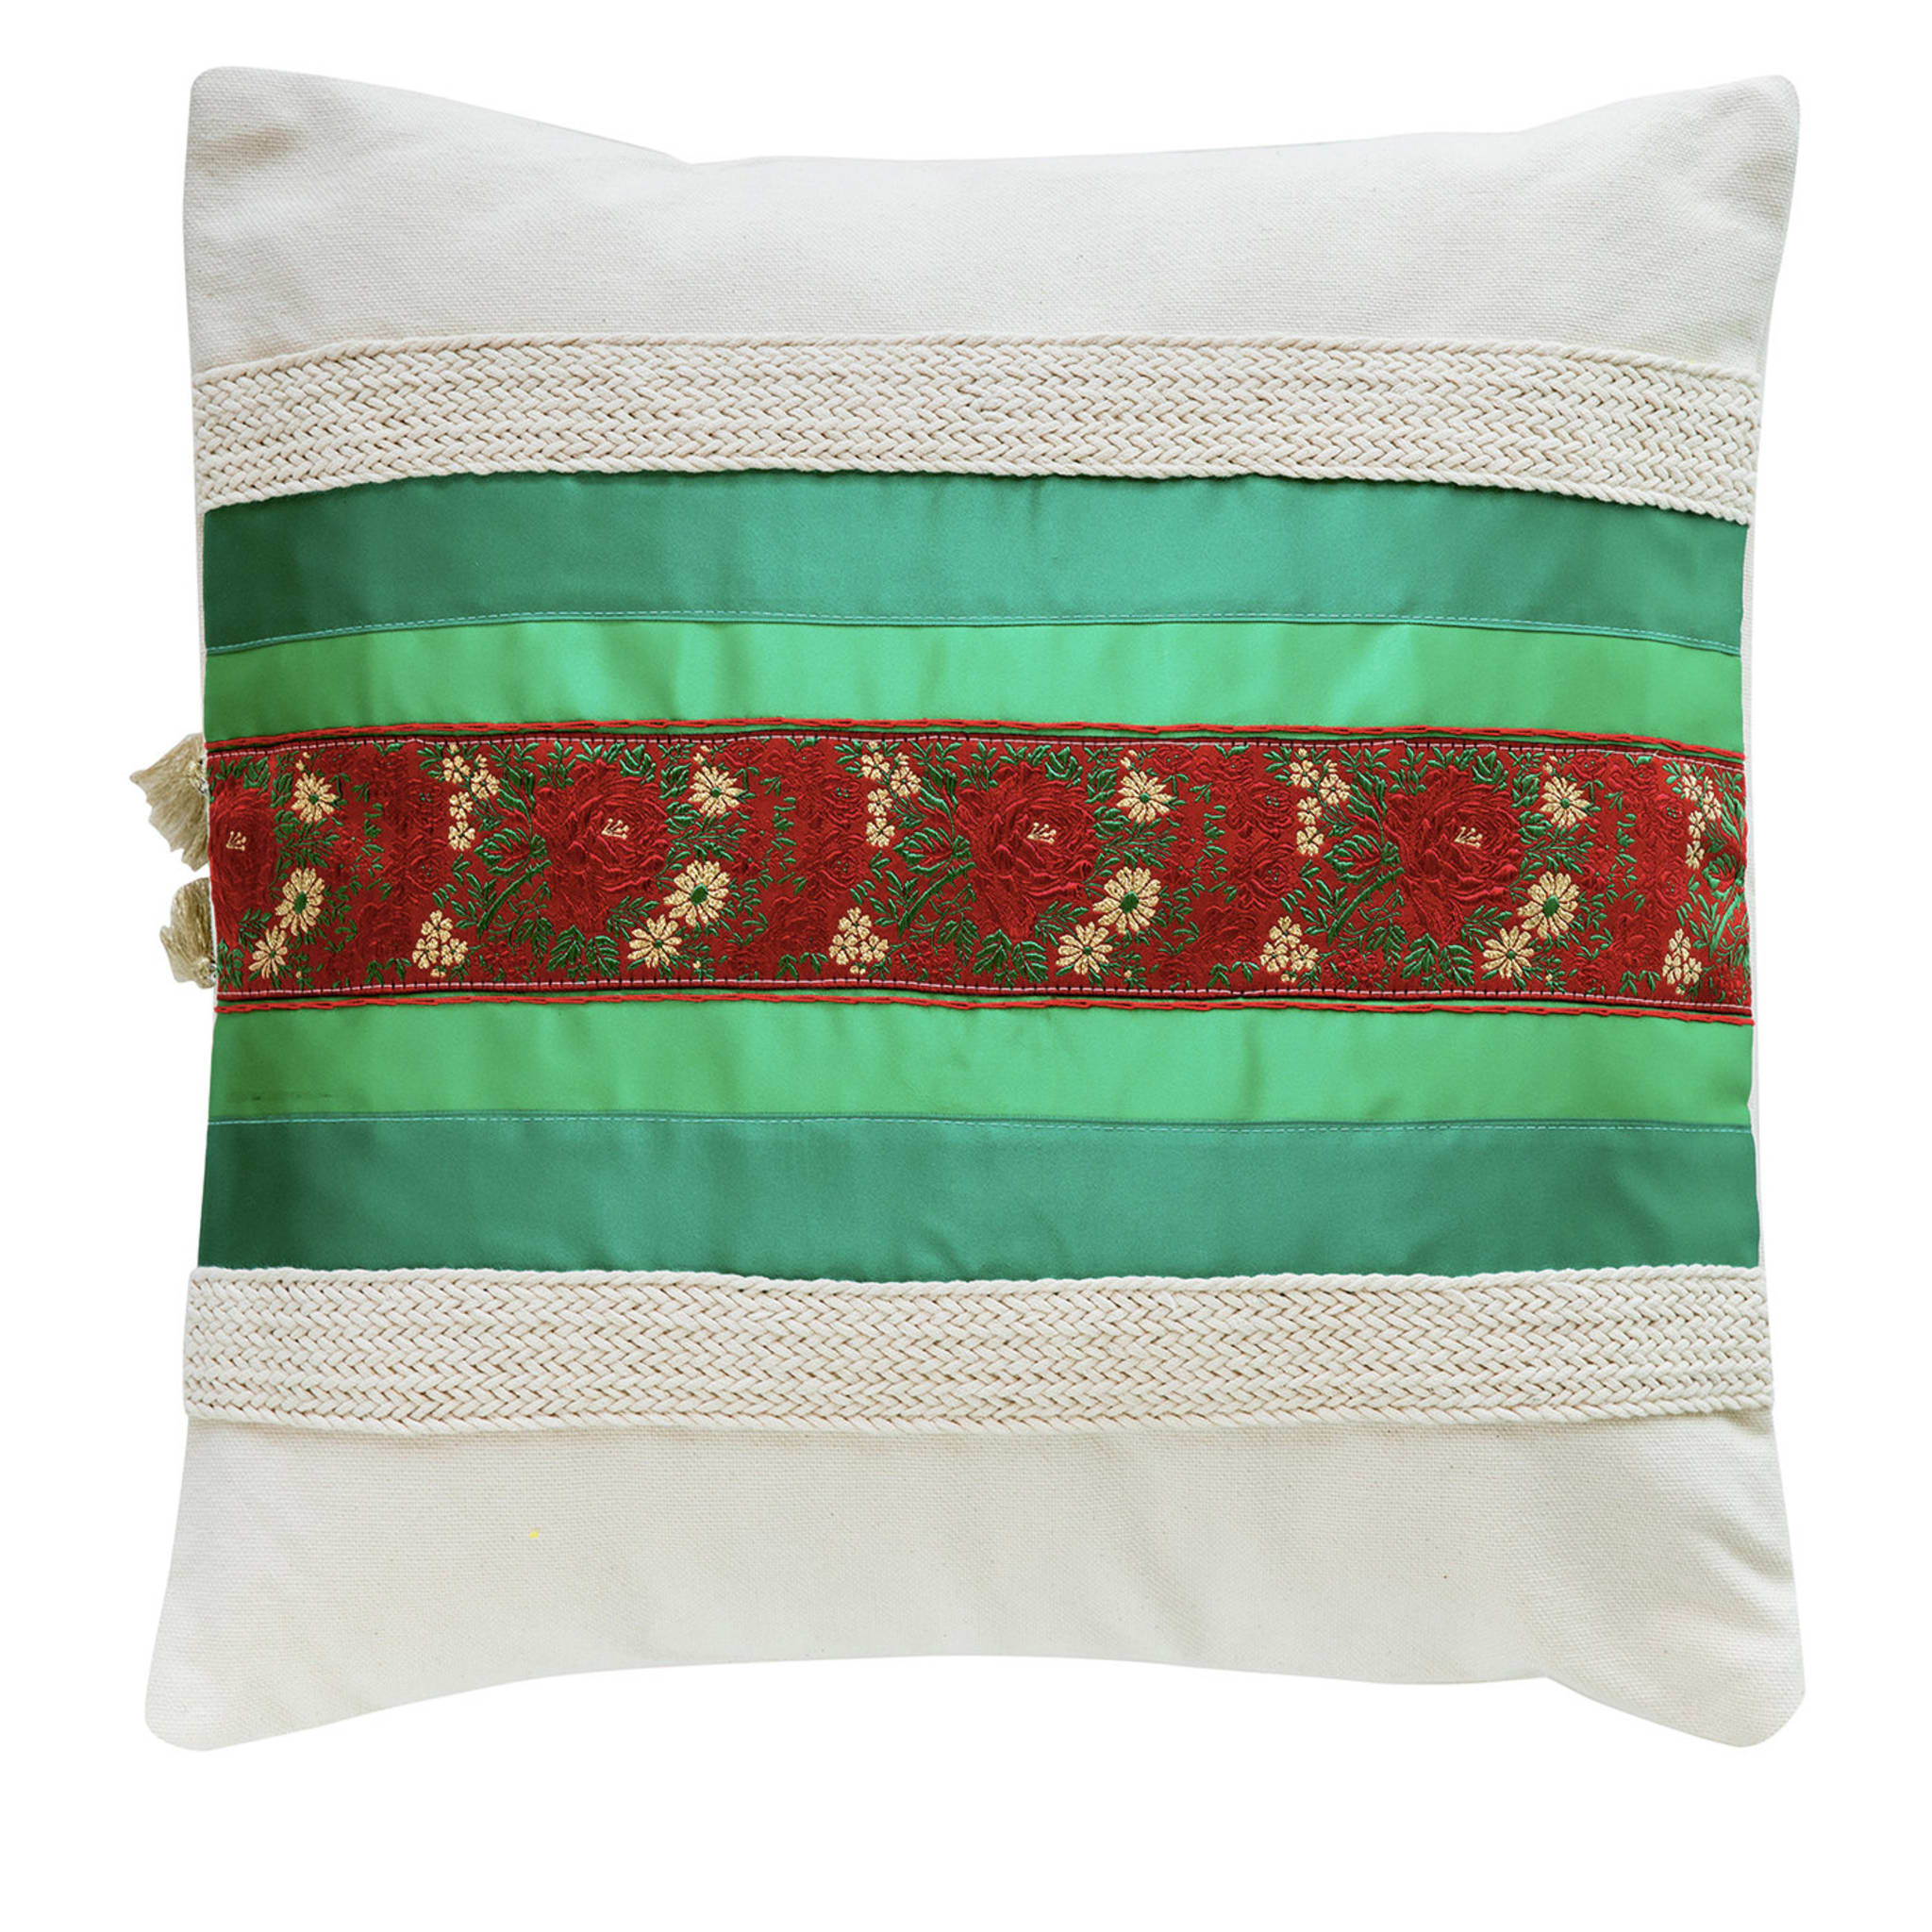 Tradition Green and Red Cushion - Main view